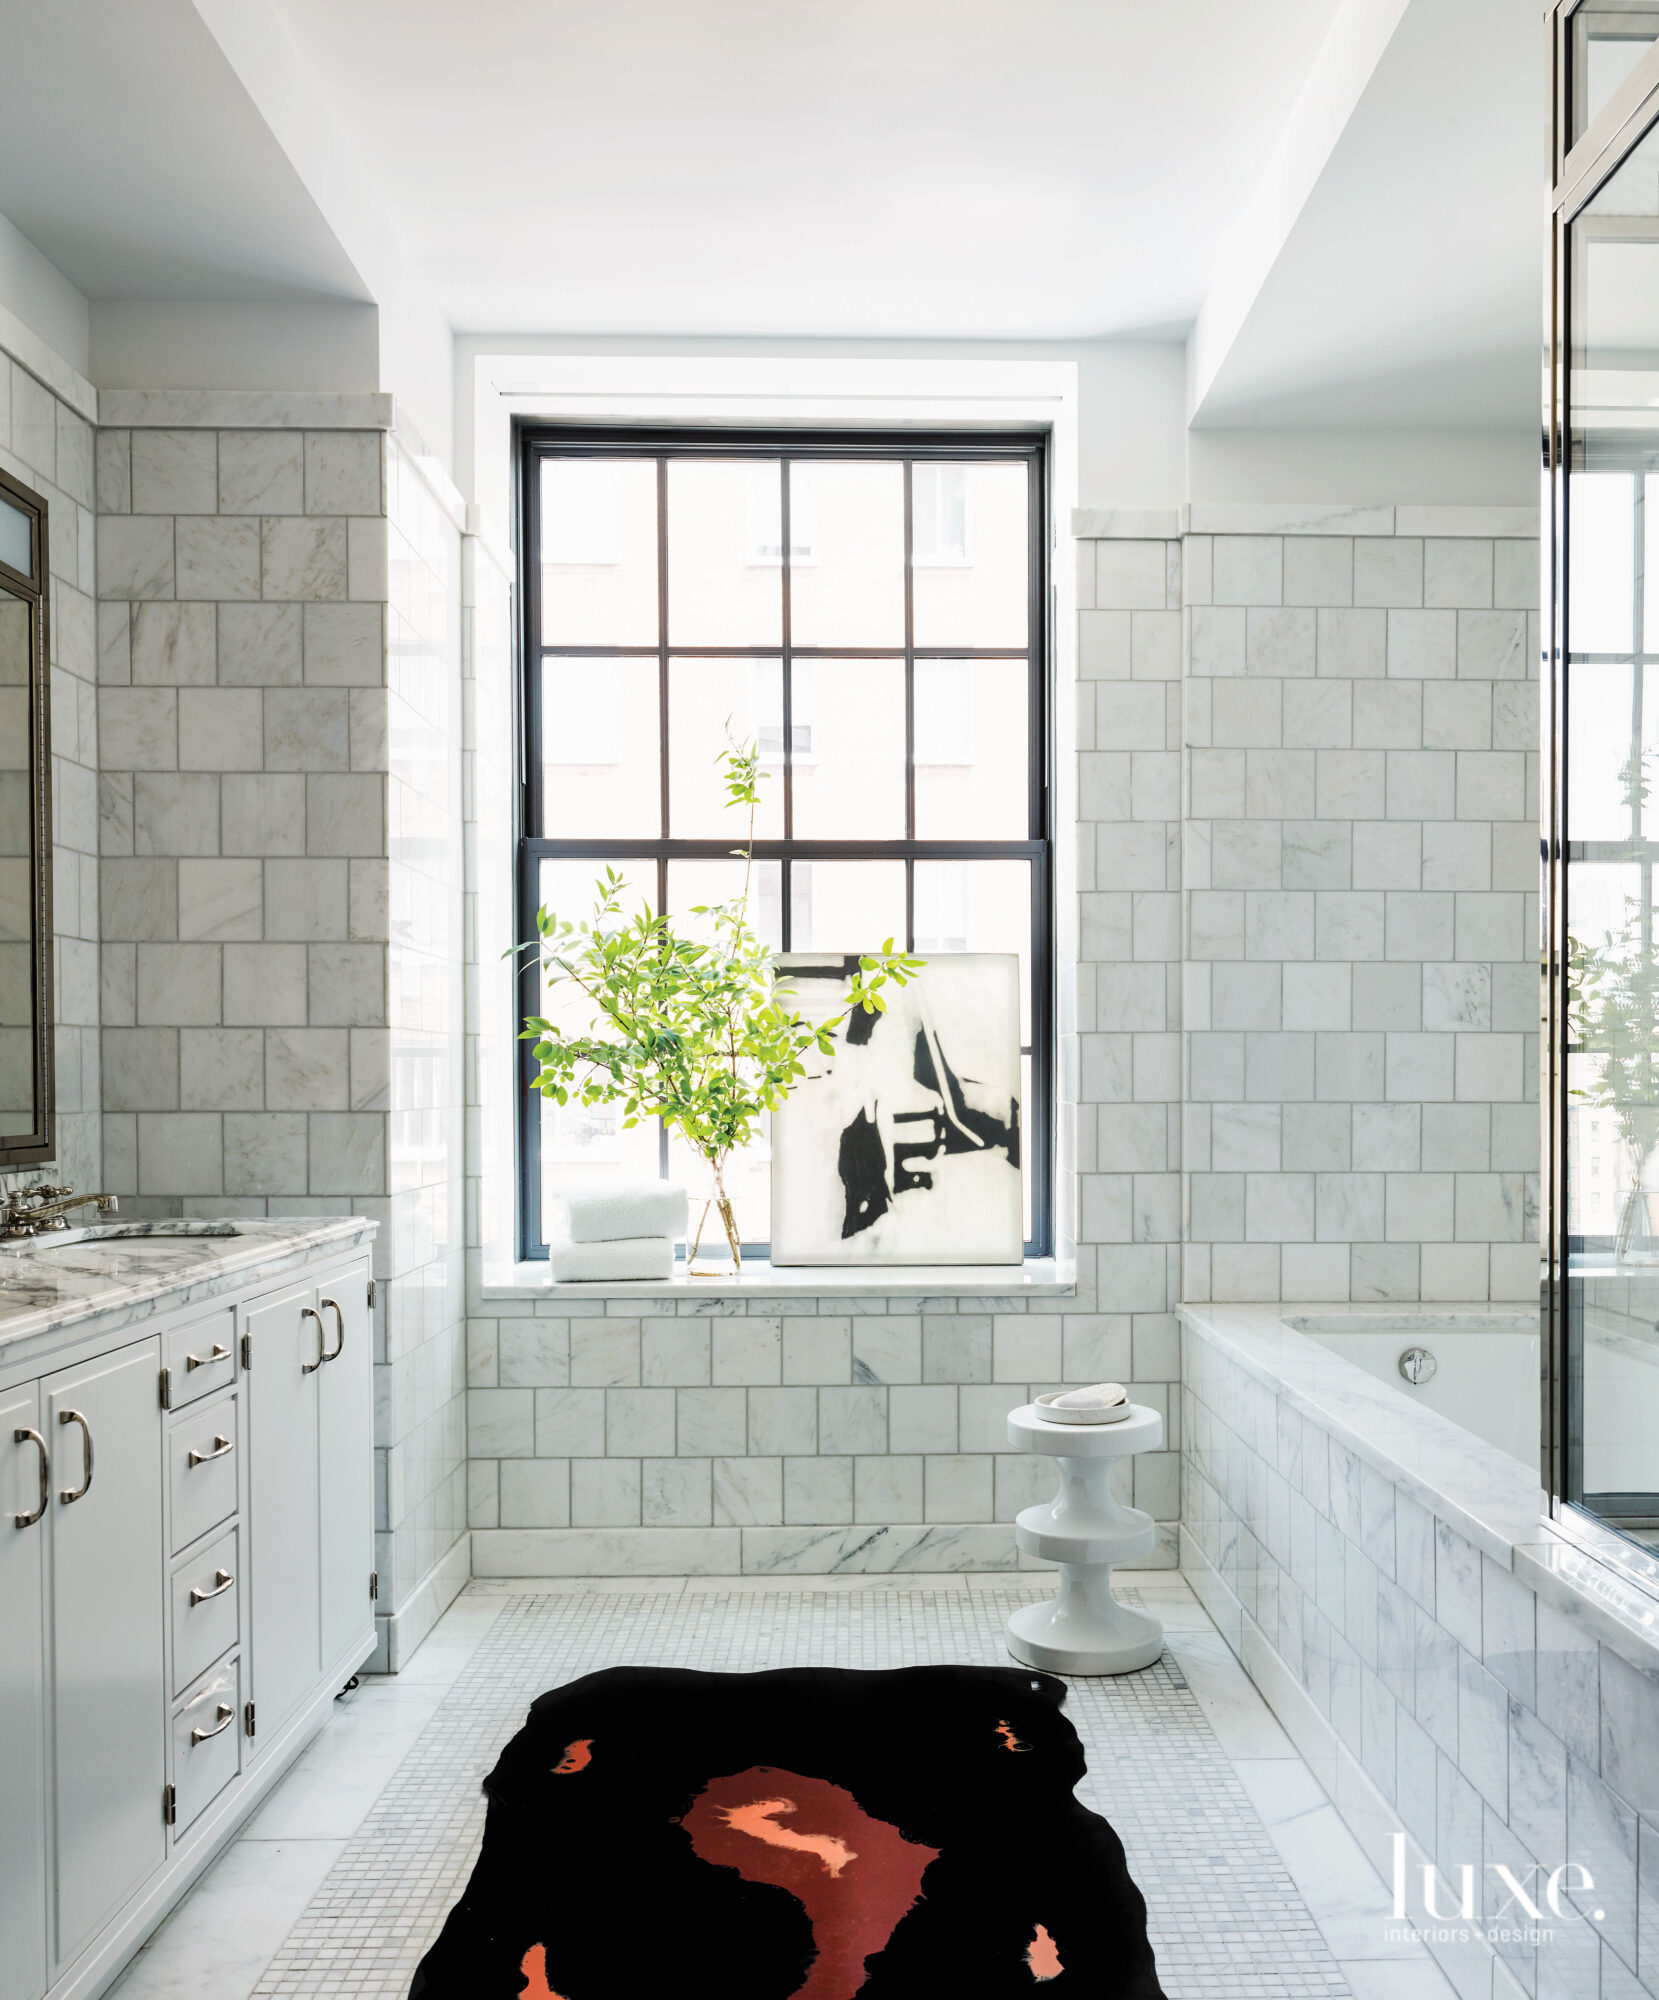 A bright window floods the master bath, clad with marbled tiles and brass finishes, with light